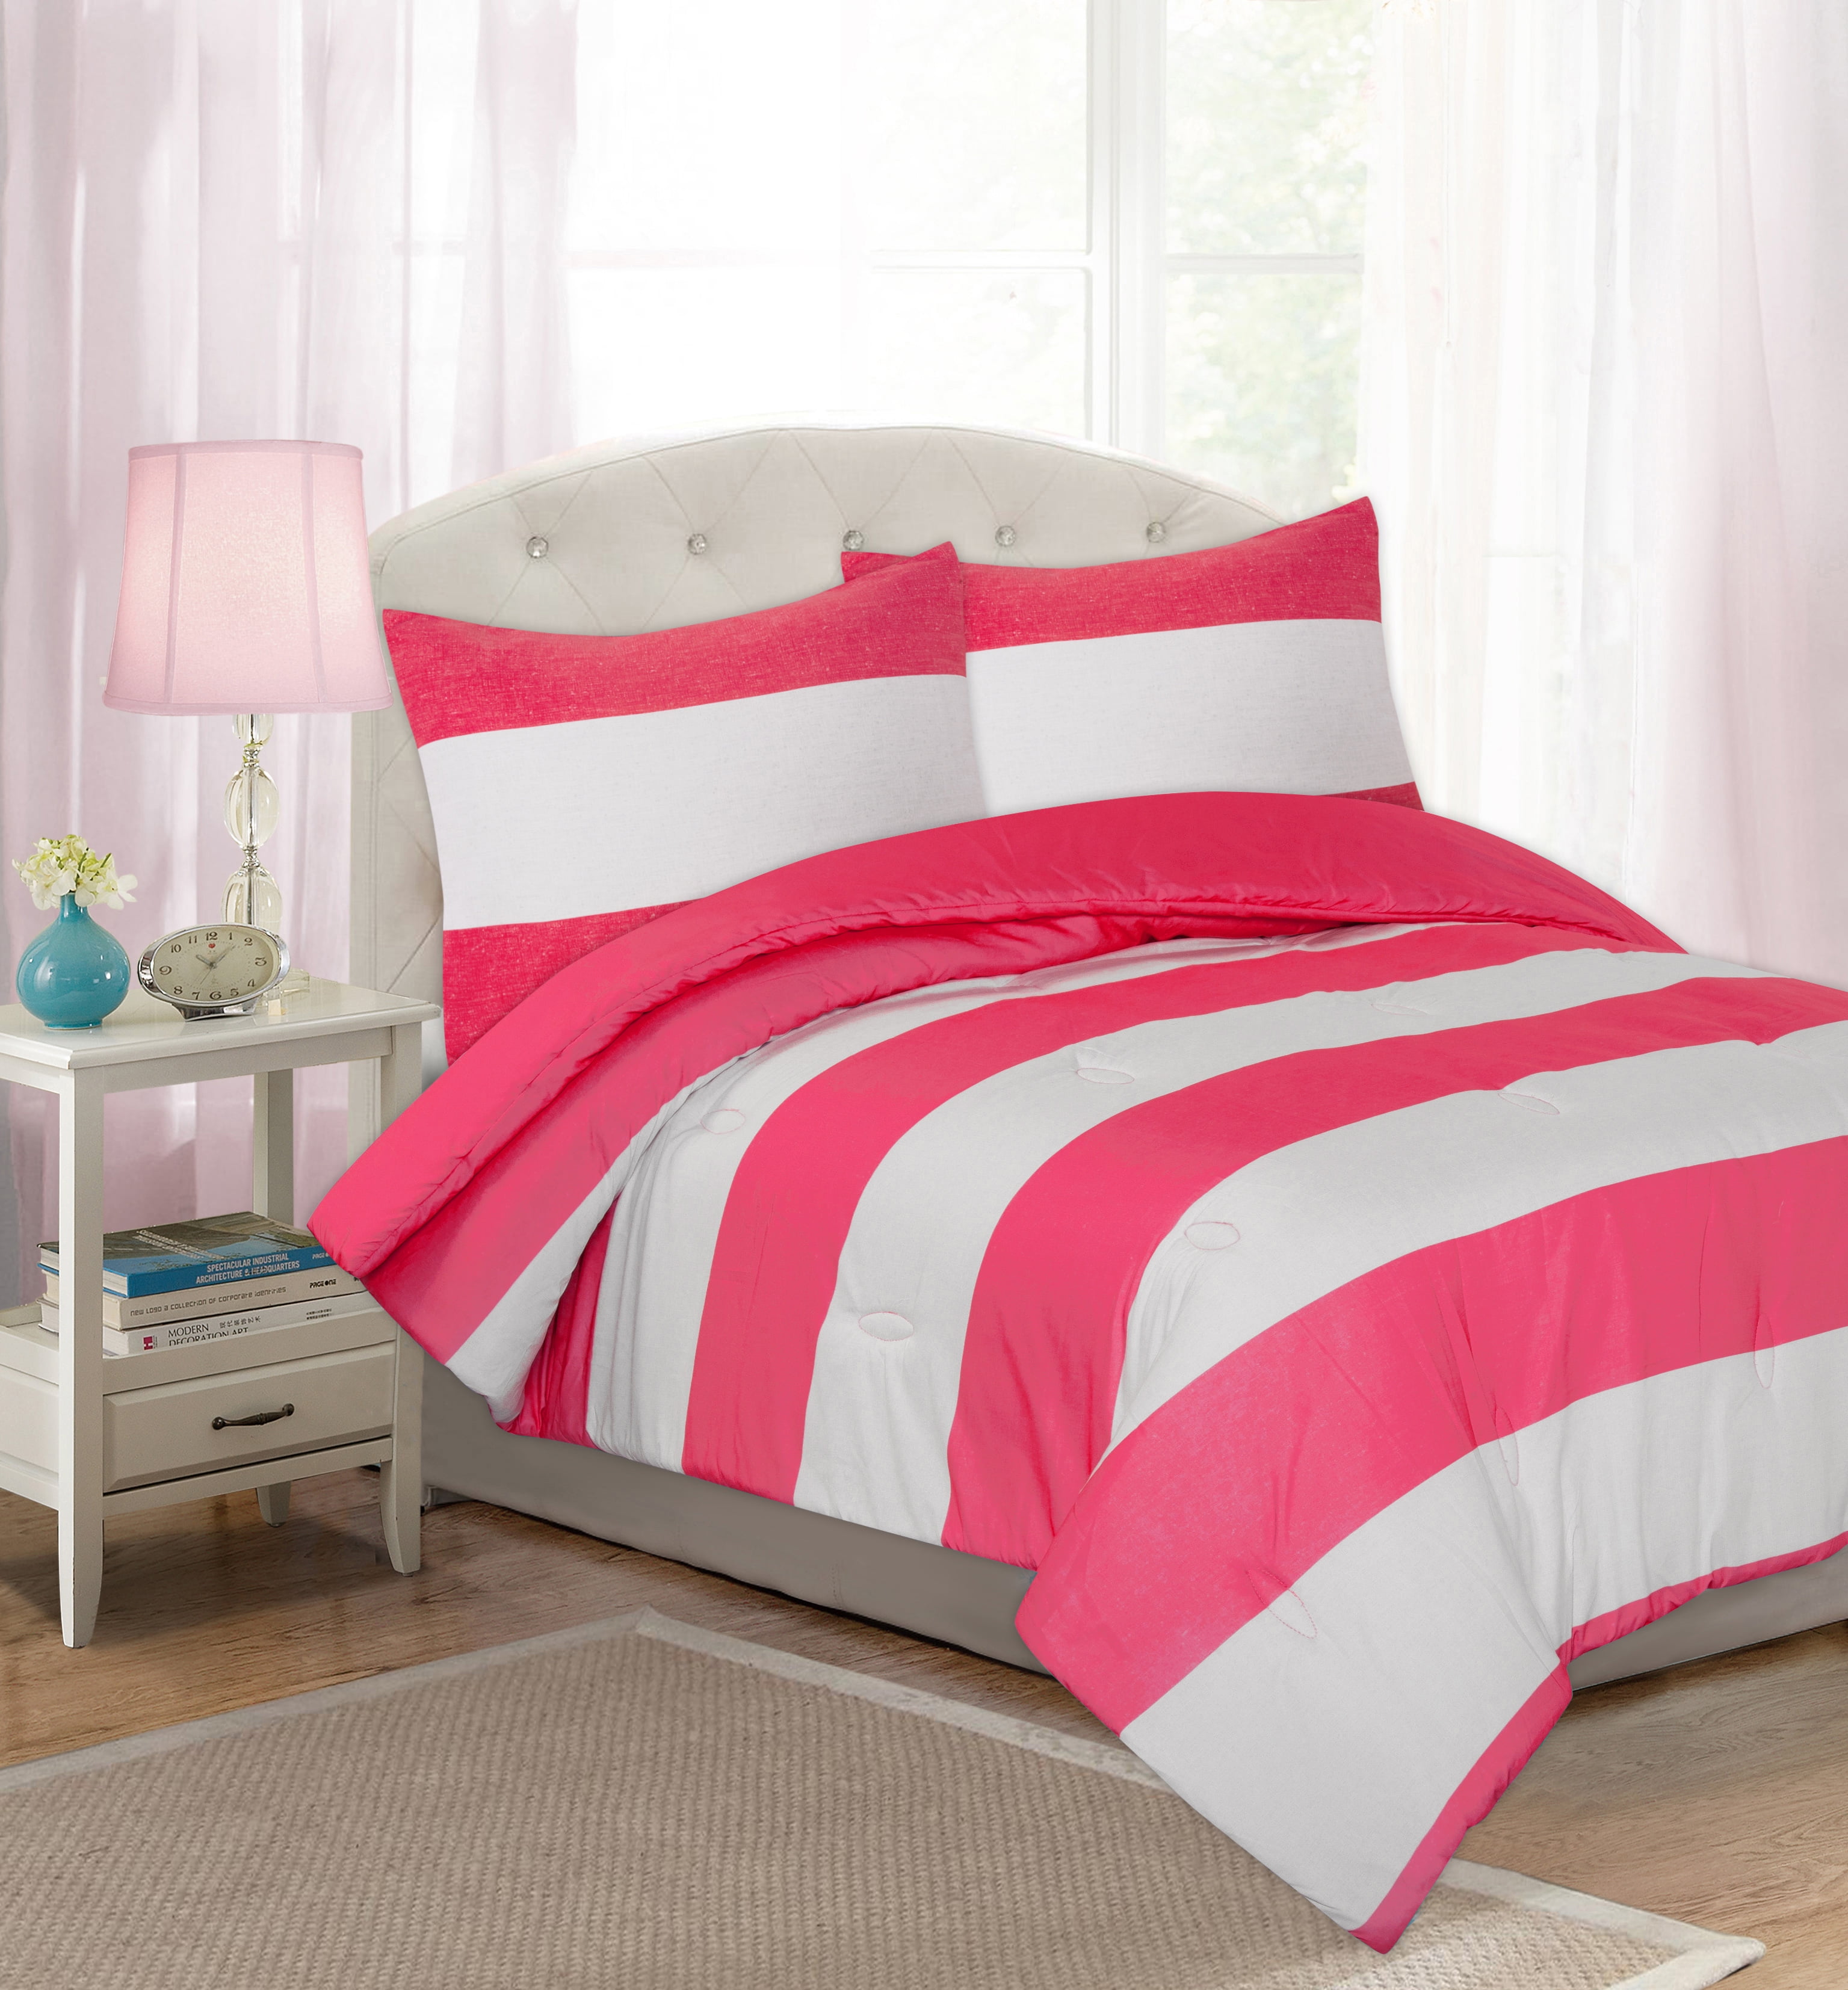 Twin XL Full Queen Bed Pink Navy Blue Cabana Striped 7 pc Comforter Set Bedding 